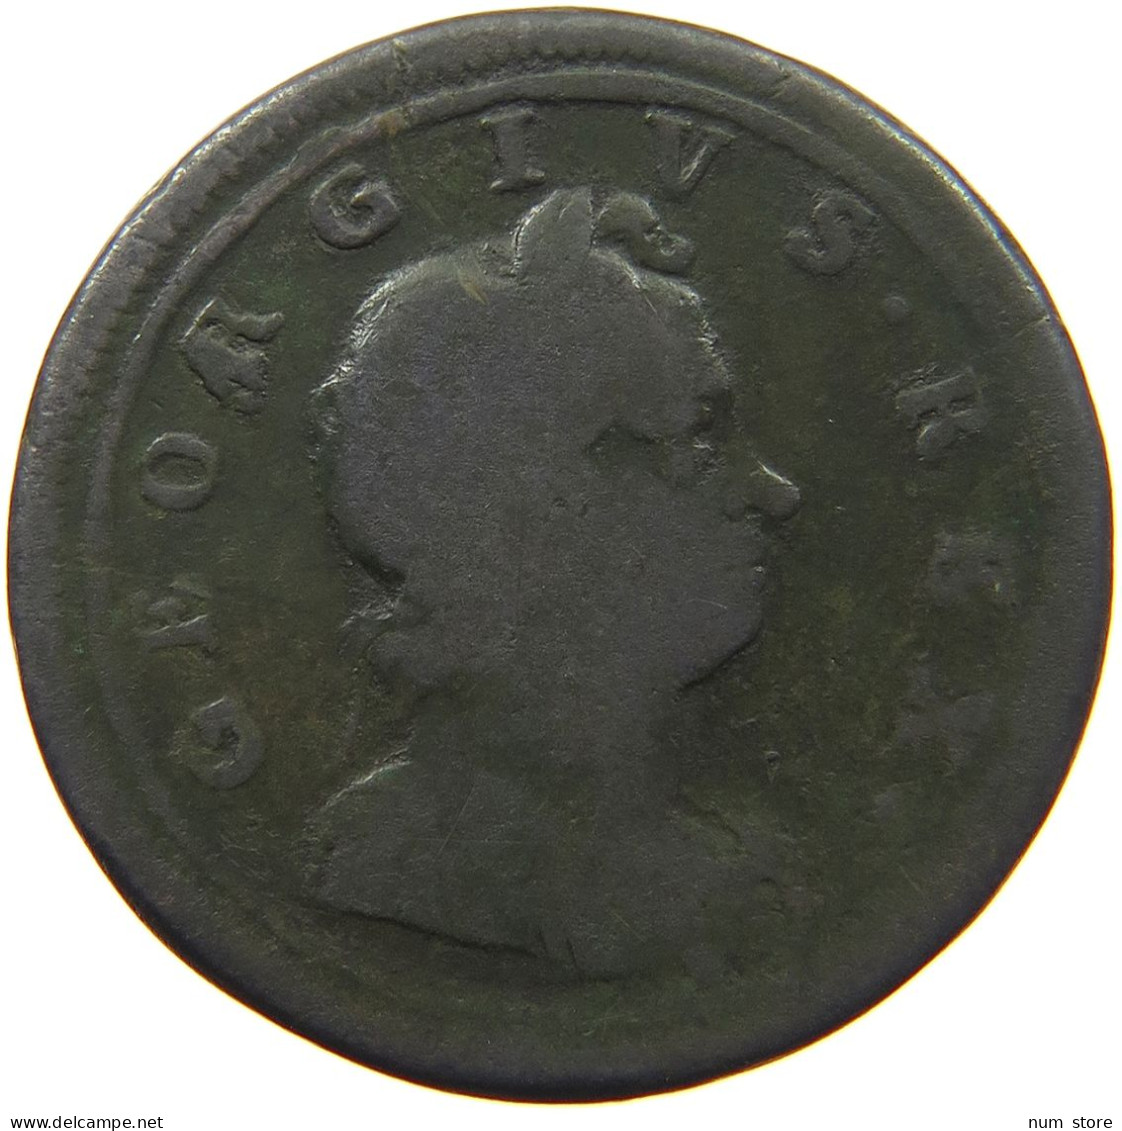 GREAT BRITAIN HALFPENNY 1719 George I. (1714-1727) #t073 0313 - B. 1/2 Penny